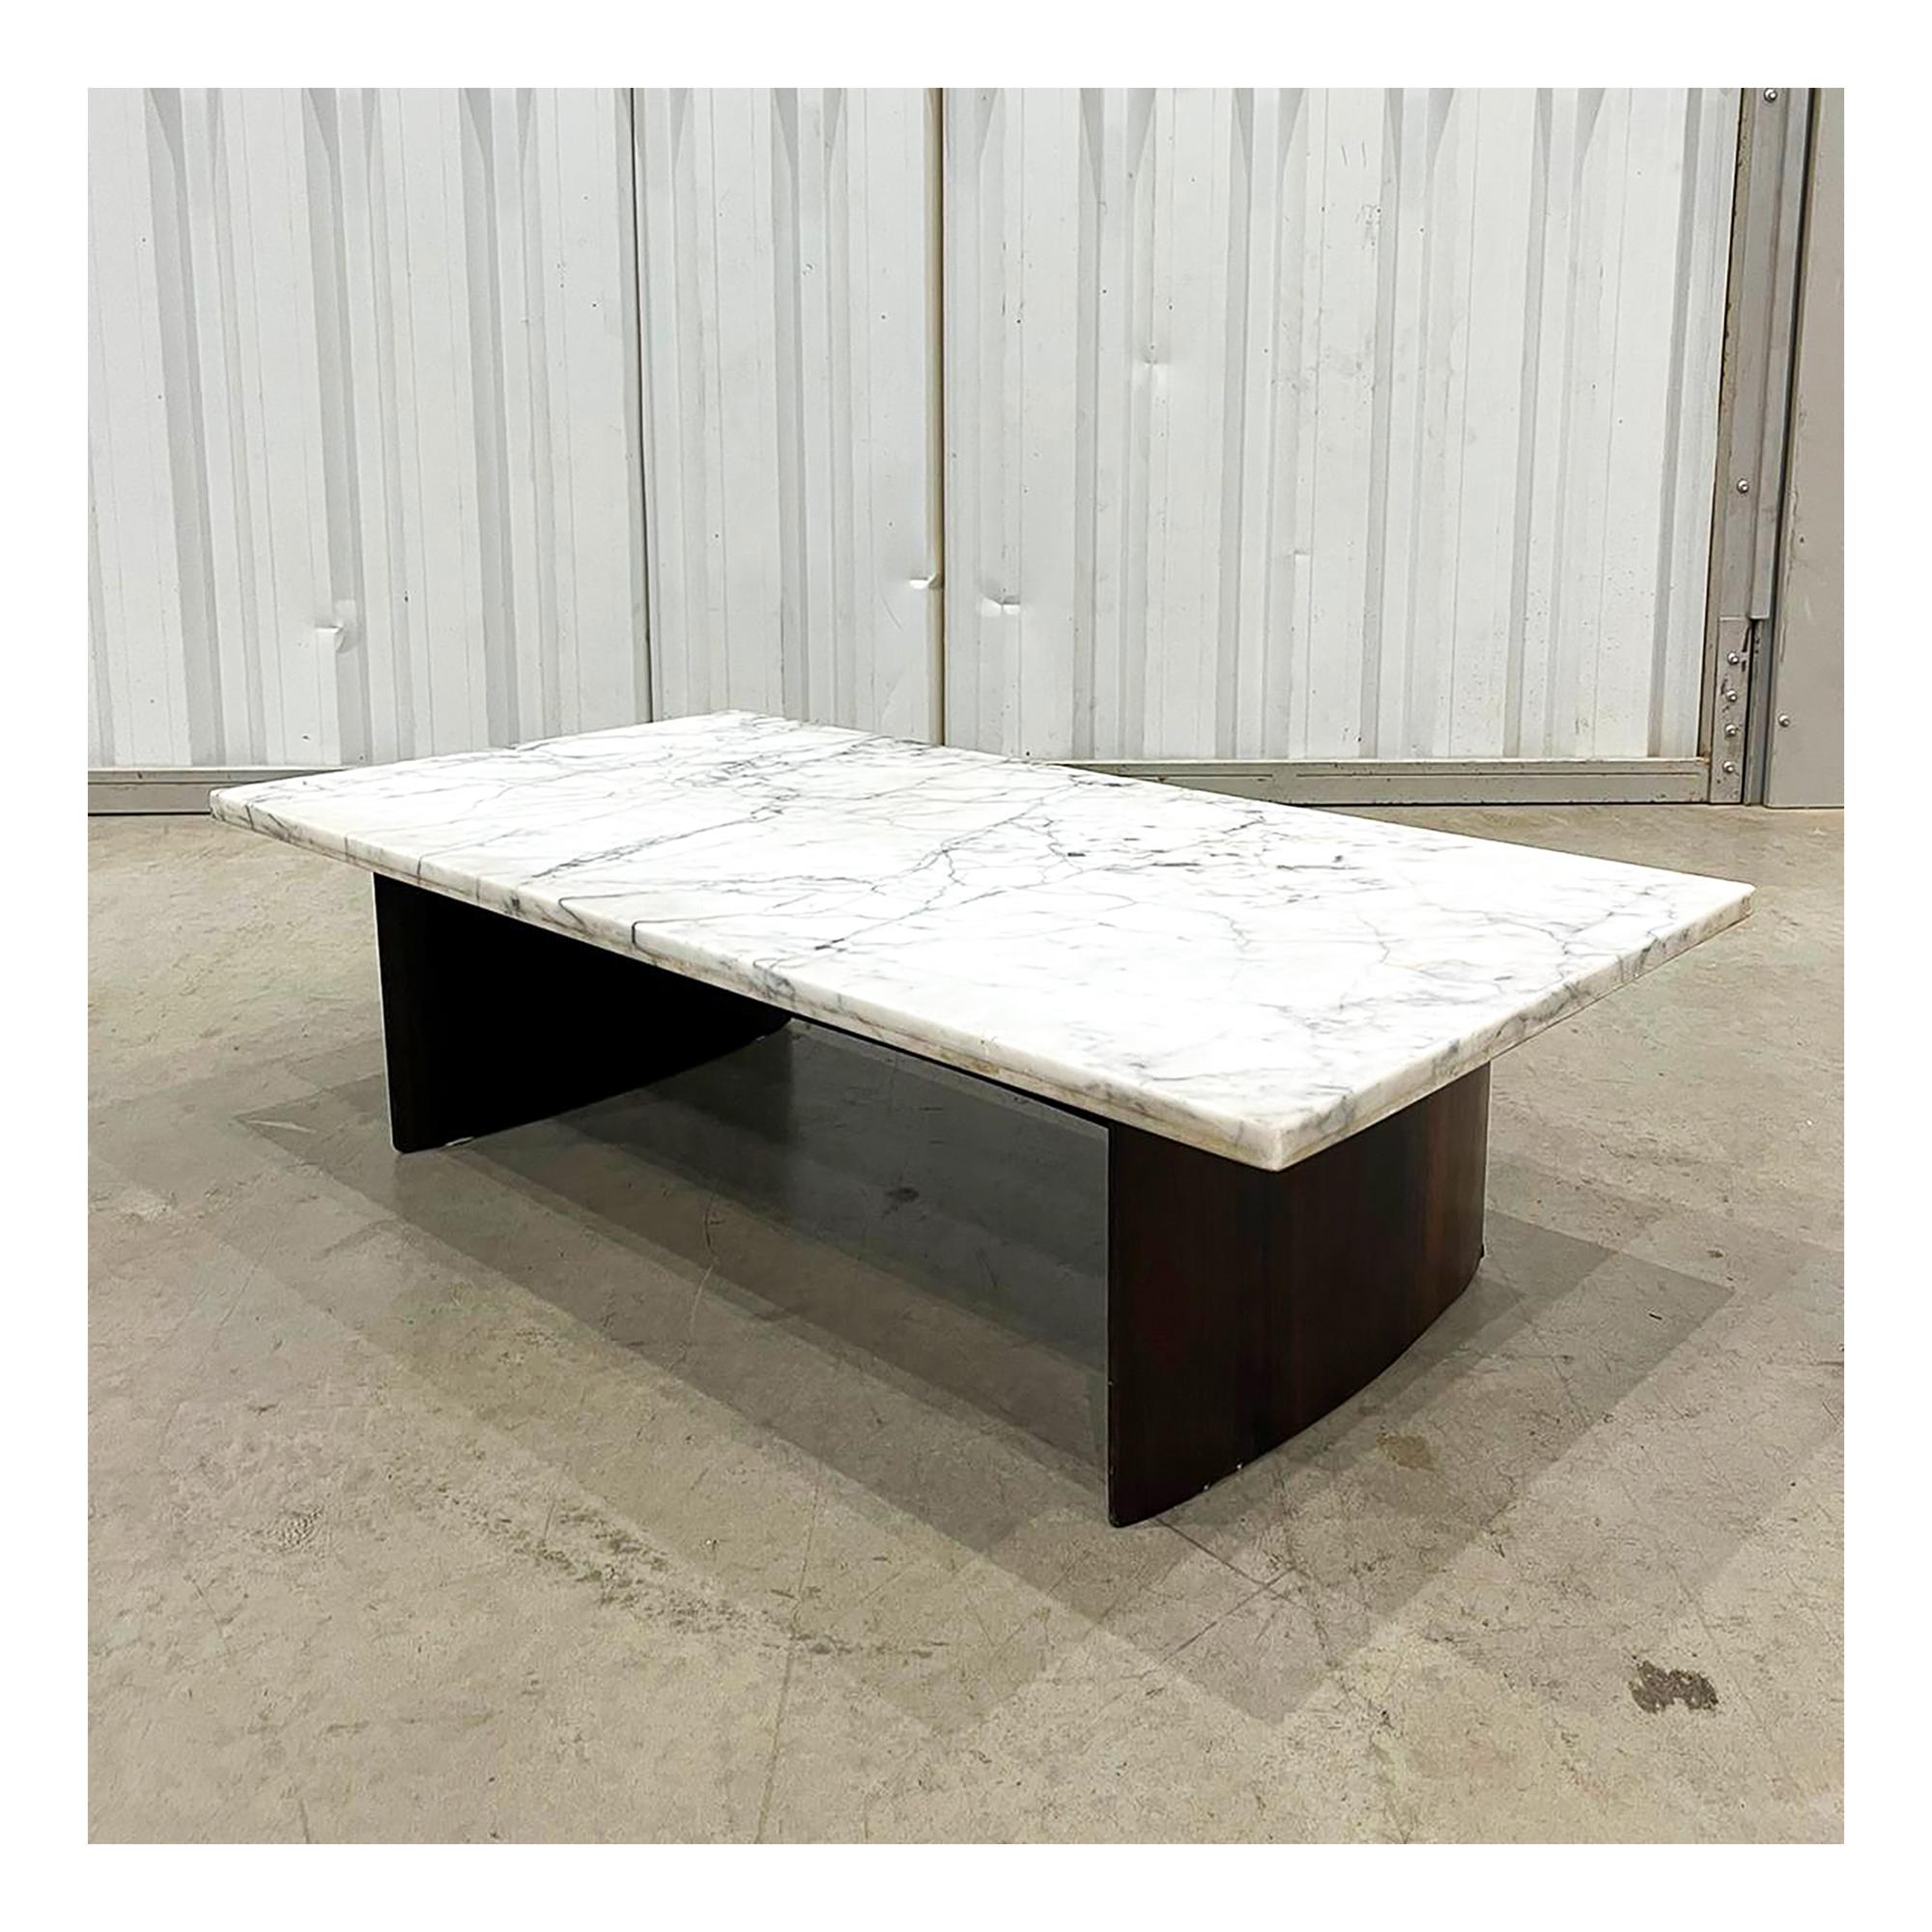 Available today in NYC with free domestic shipping included, this Brazilian Modern Coffee Table made in Hardwood and Marble by Joaquim Tenreiro in the 50's is gorgeous.

This coffee table has a wood structure made in Brazilian Rosewood, known as